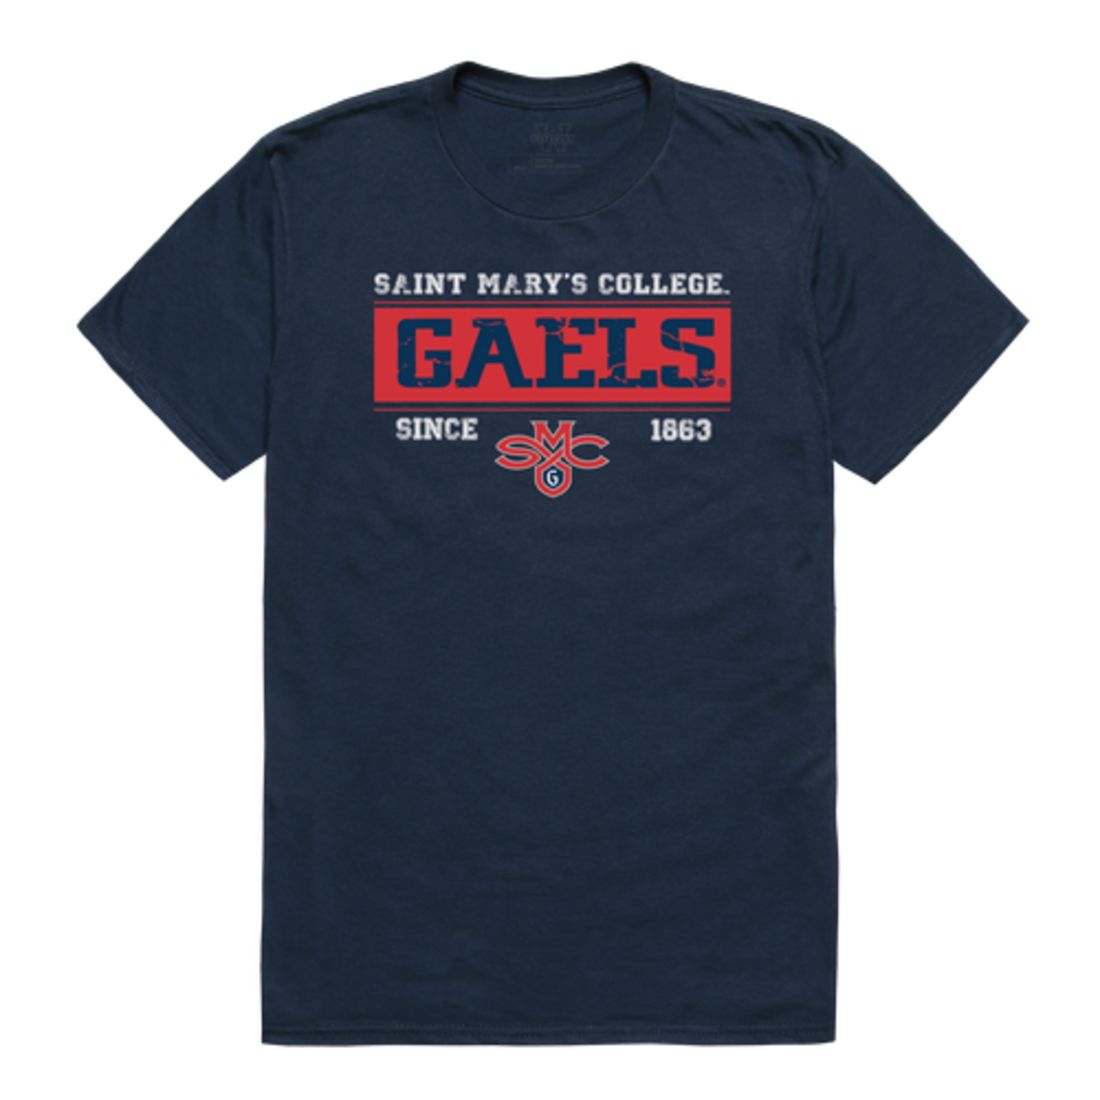 Saint Mary's College of California Gaels Established T-Shirt Tee